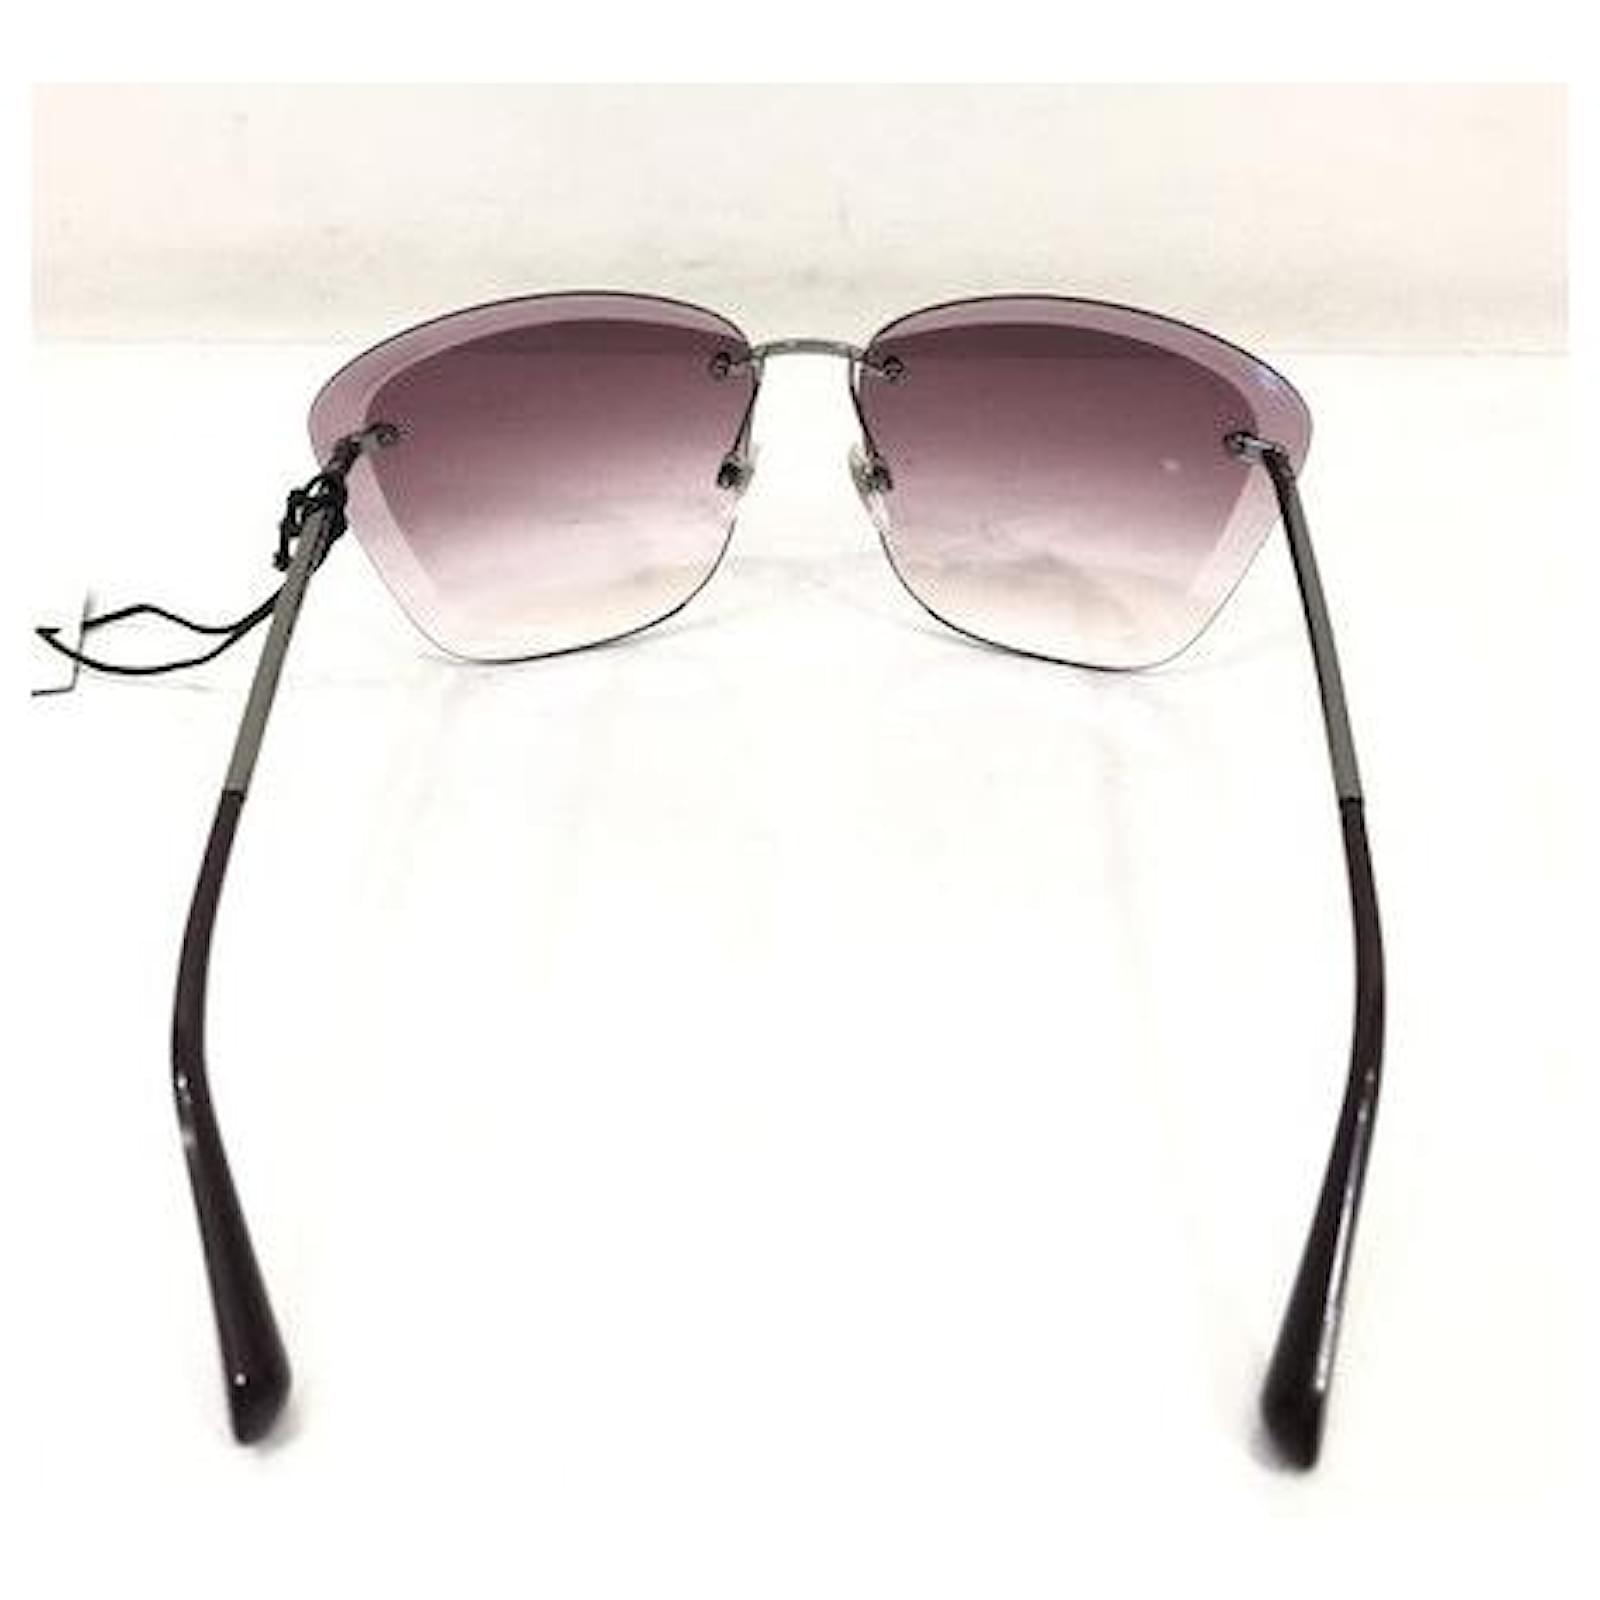 [Used] CHANEL / 4221 / Pink / Chanel / Sunglasses